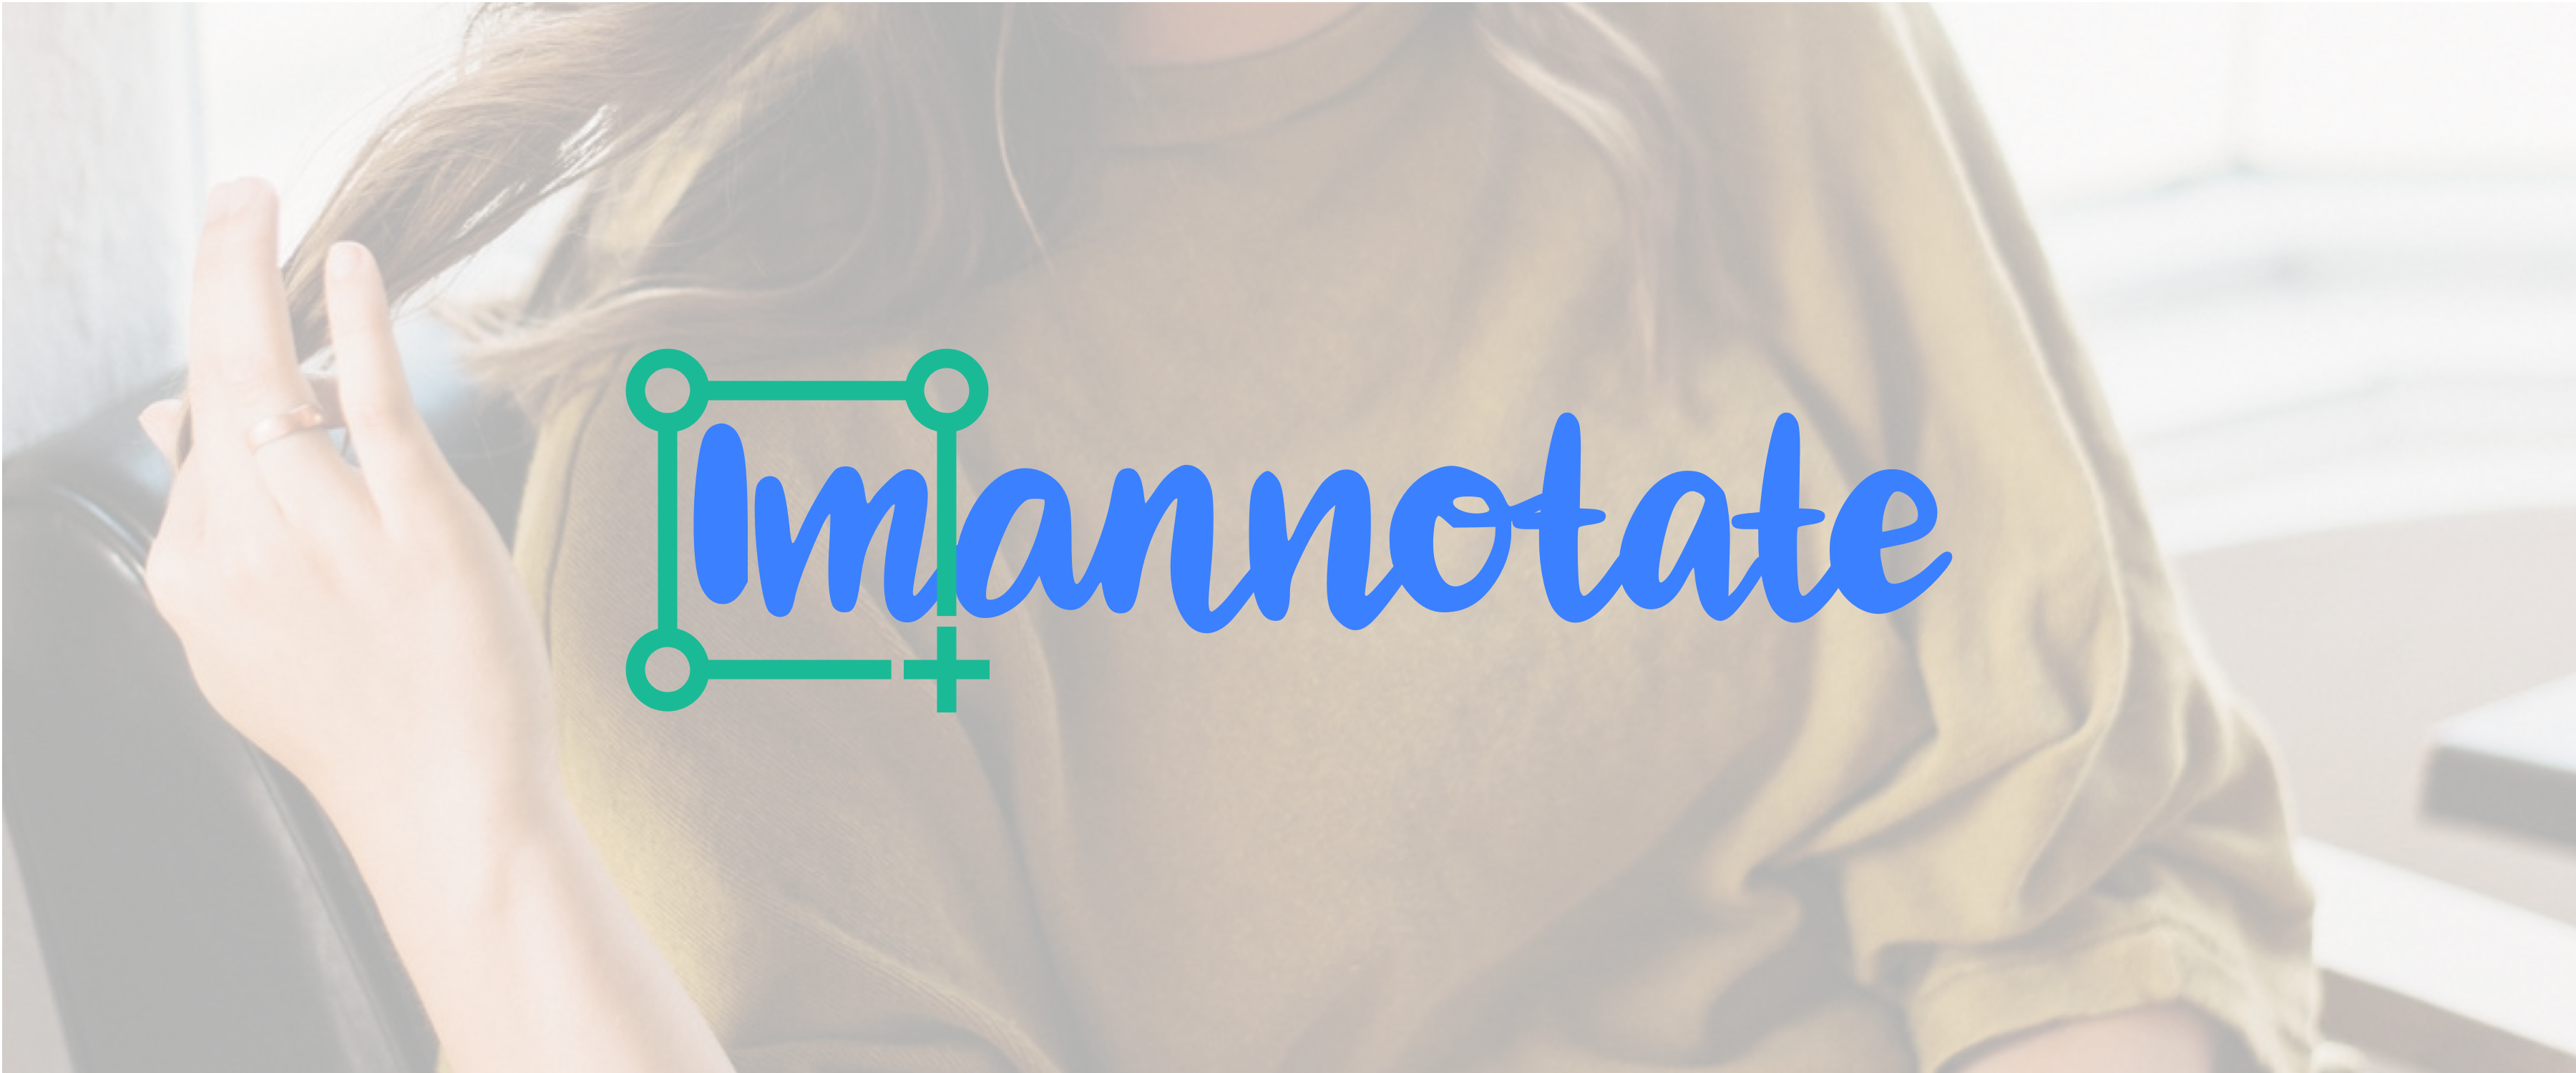 Imannotate, opensource collaborative image annotation for machine learning